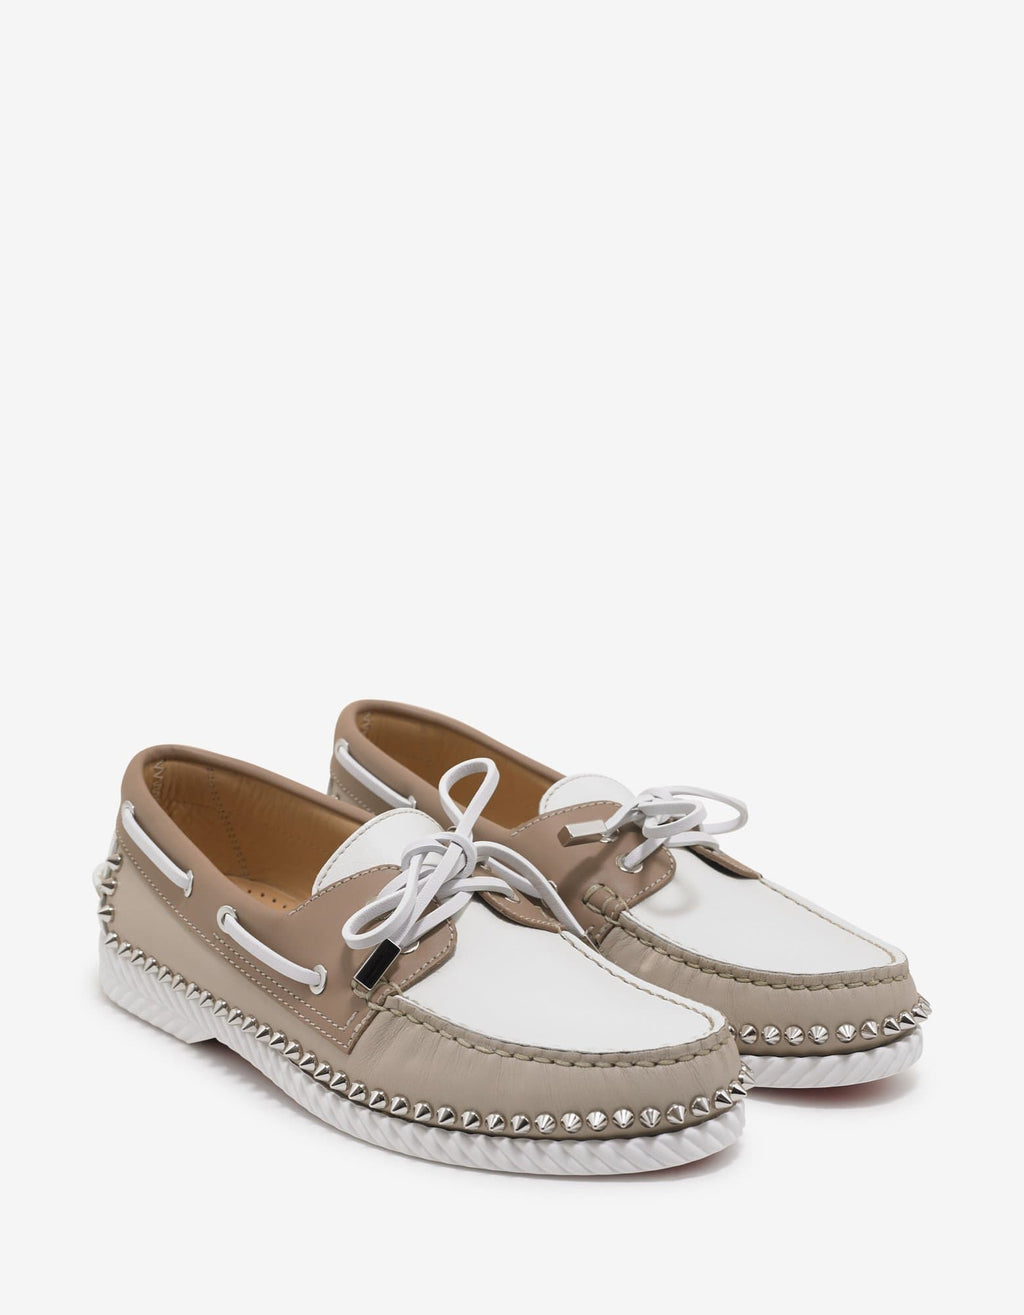 Christian Louboutin Christian Louboutin Steckel Colombe Beige Boat Shoes